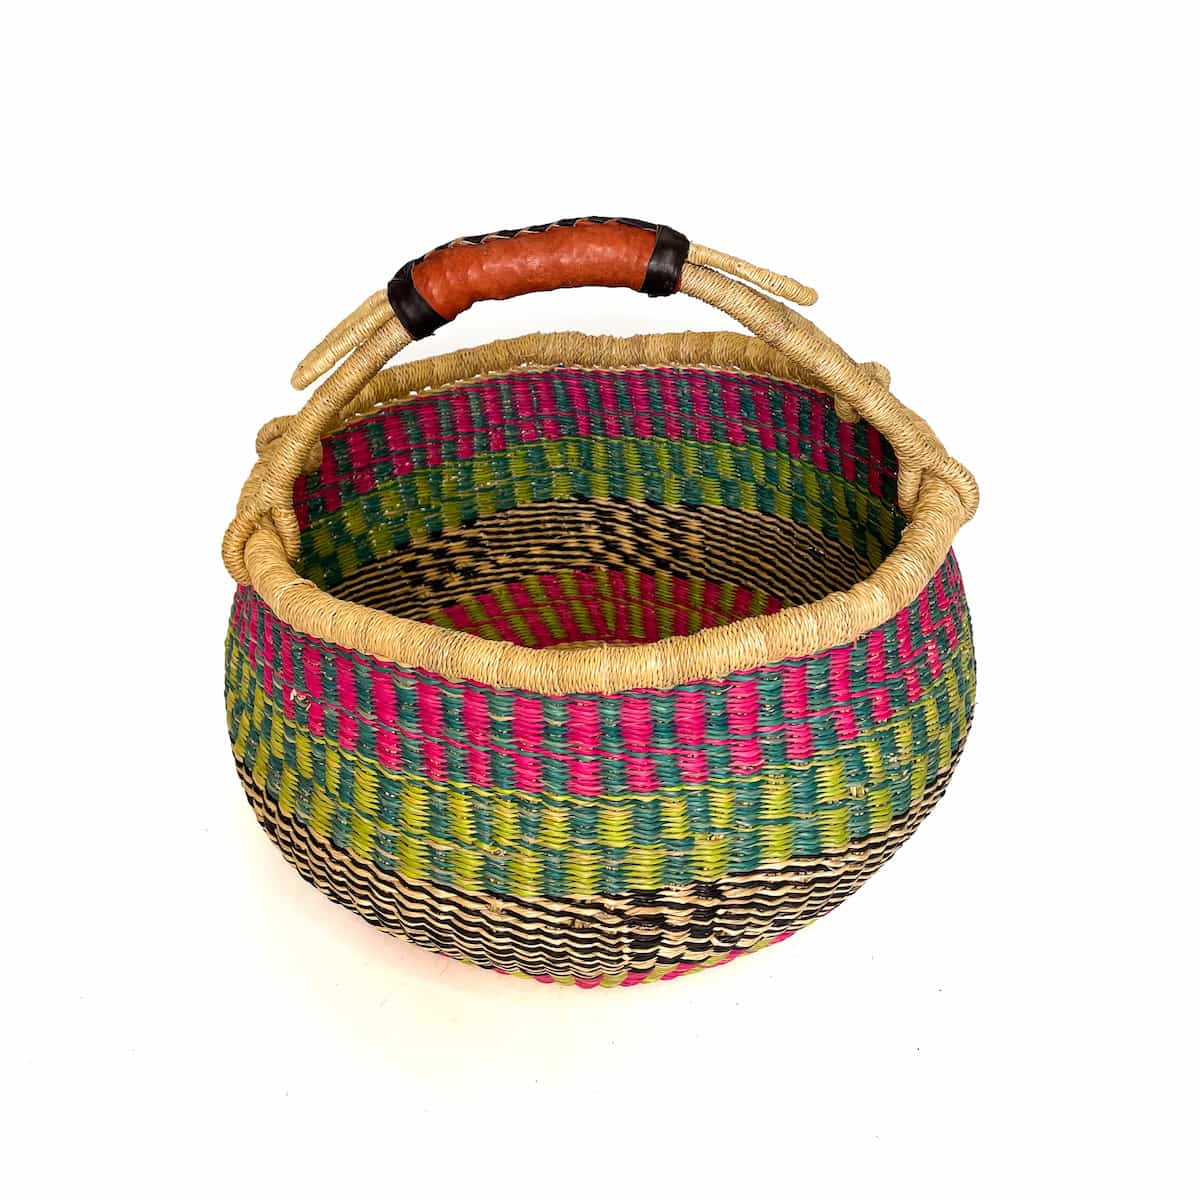 Medium Round Basket Patterned Pink and Green